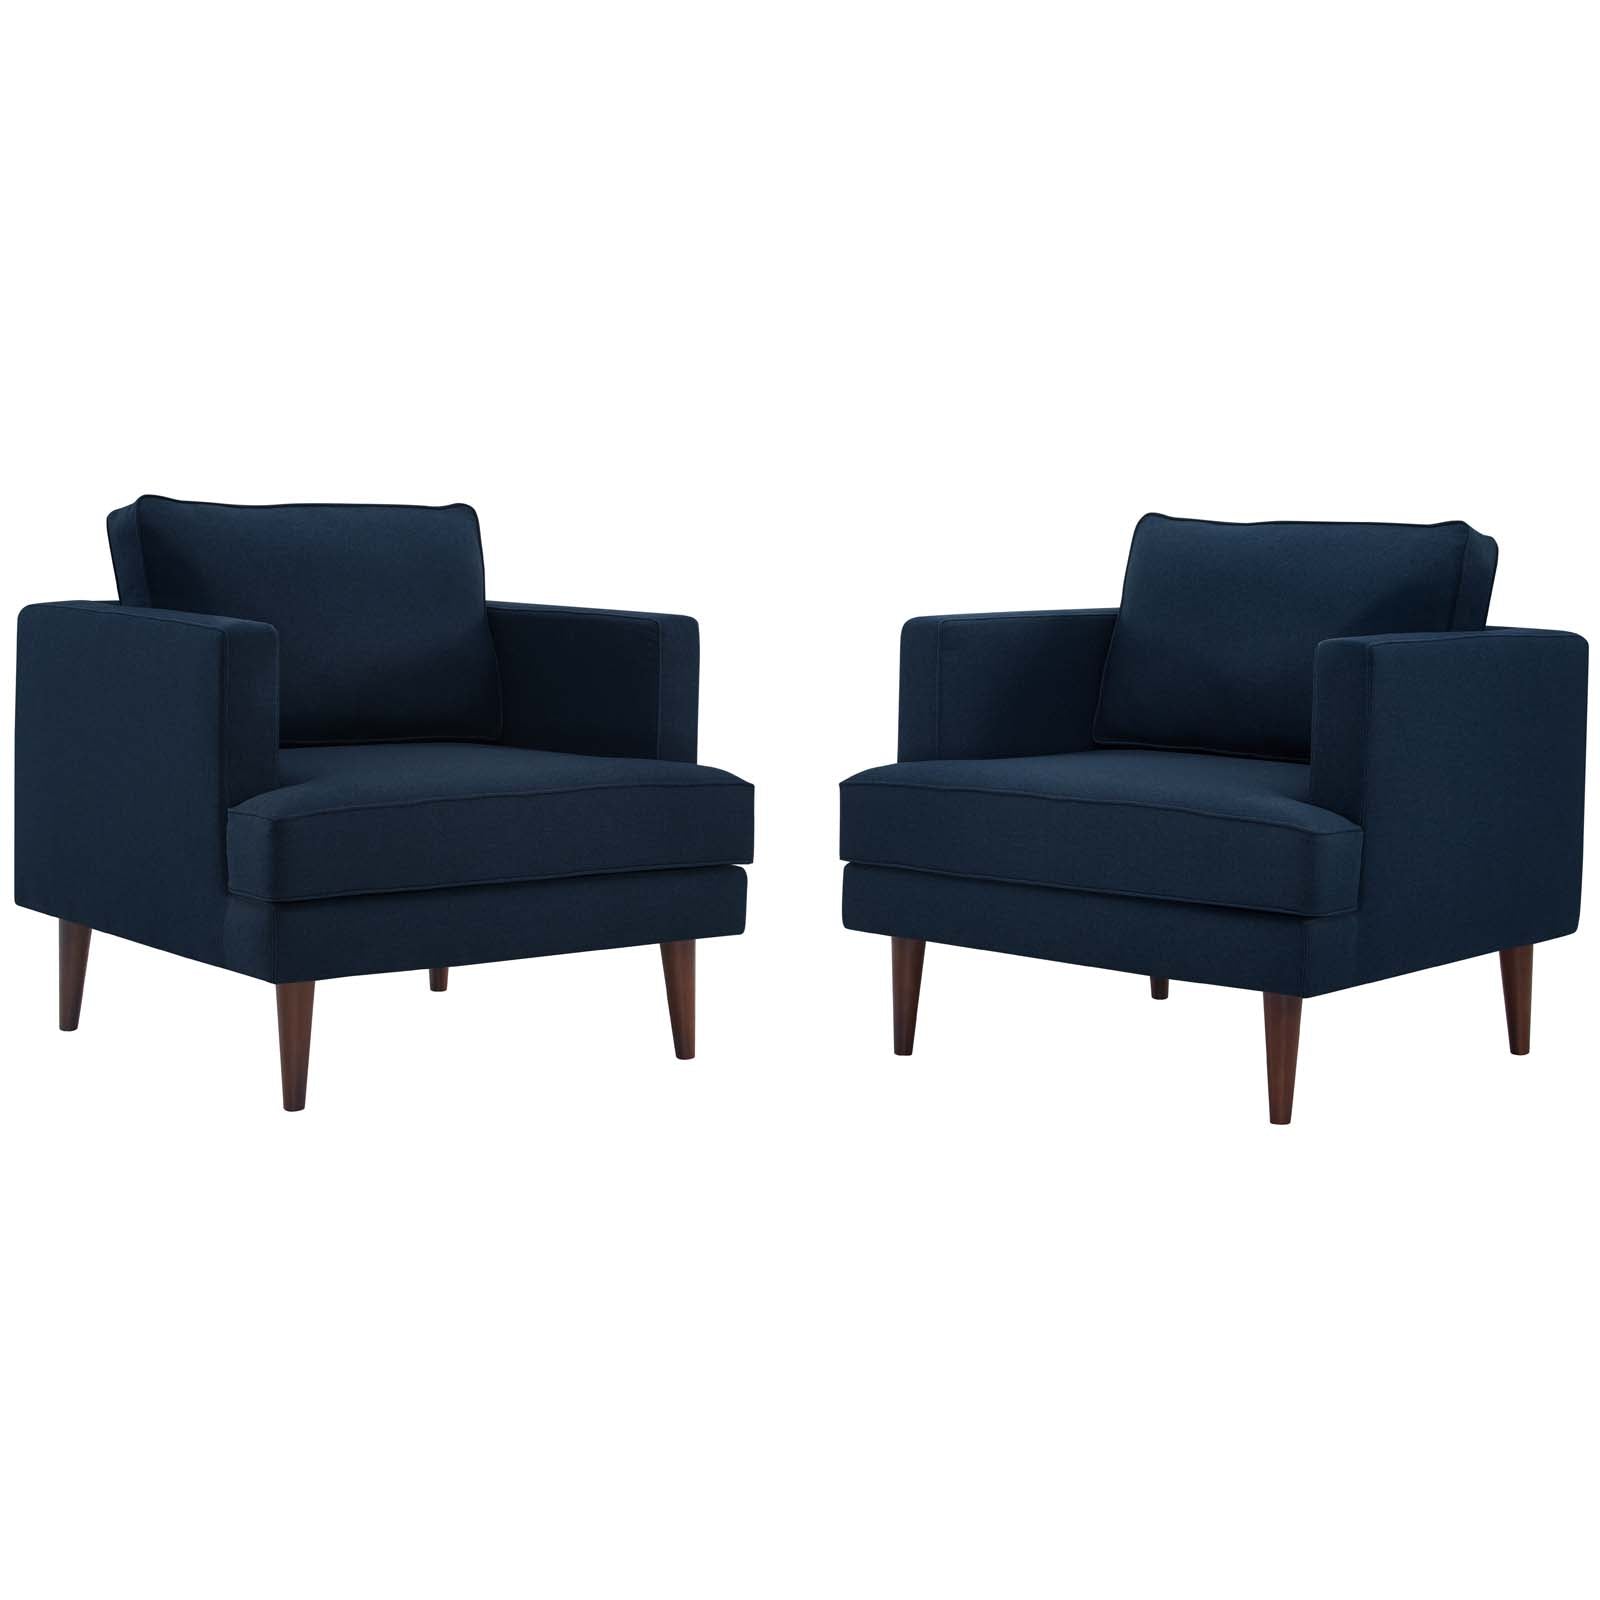 Agile Upholstered Fabric Armchair Set of 2 - East Shore Modern Home Furnishings